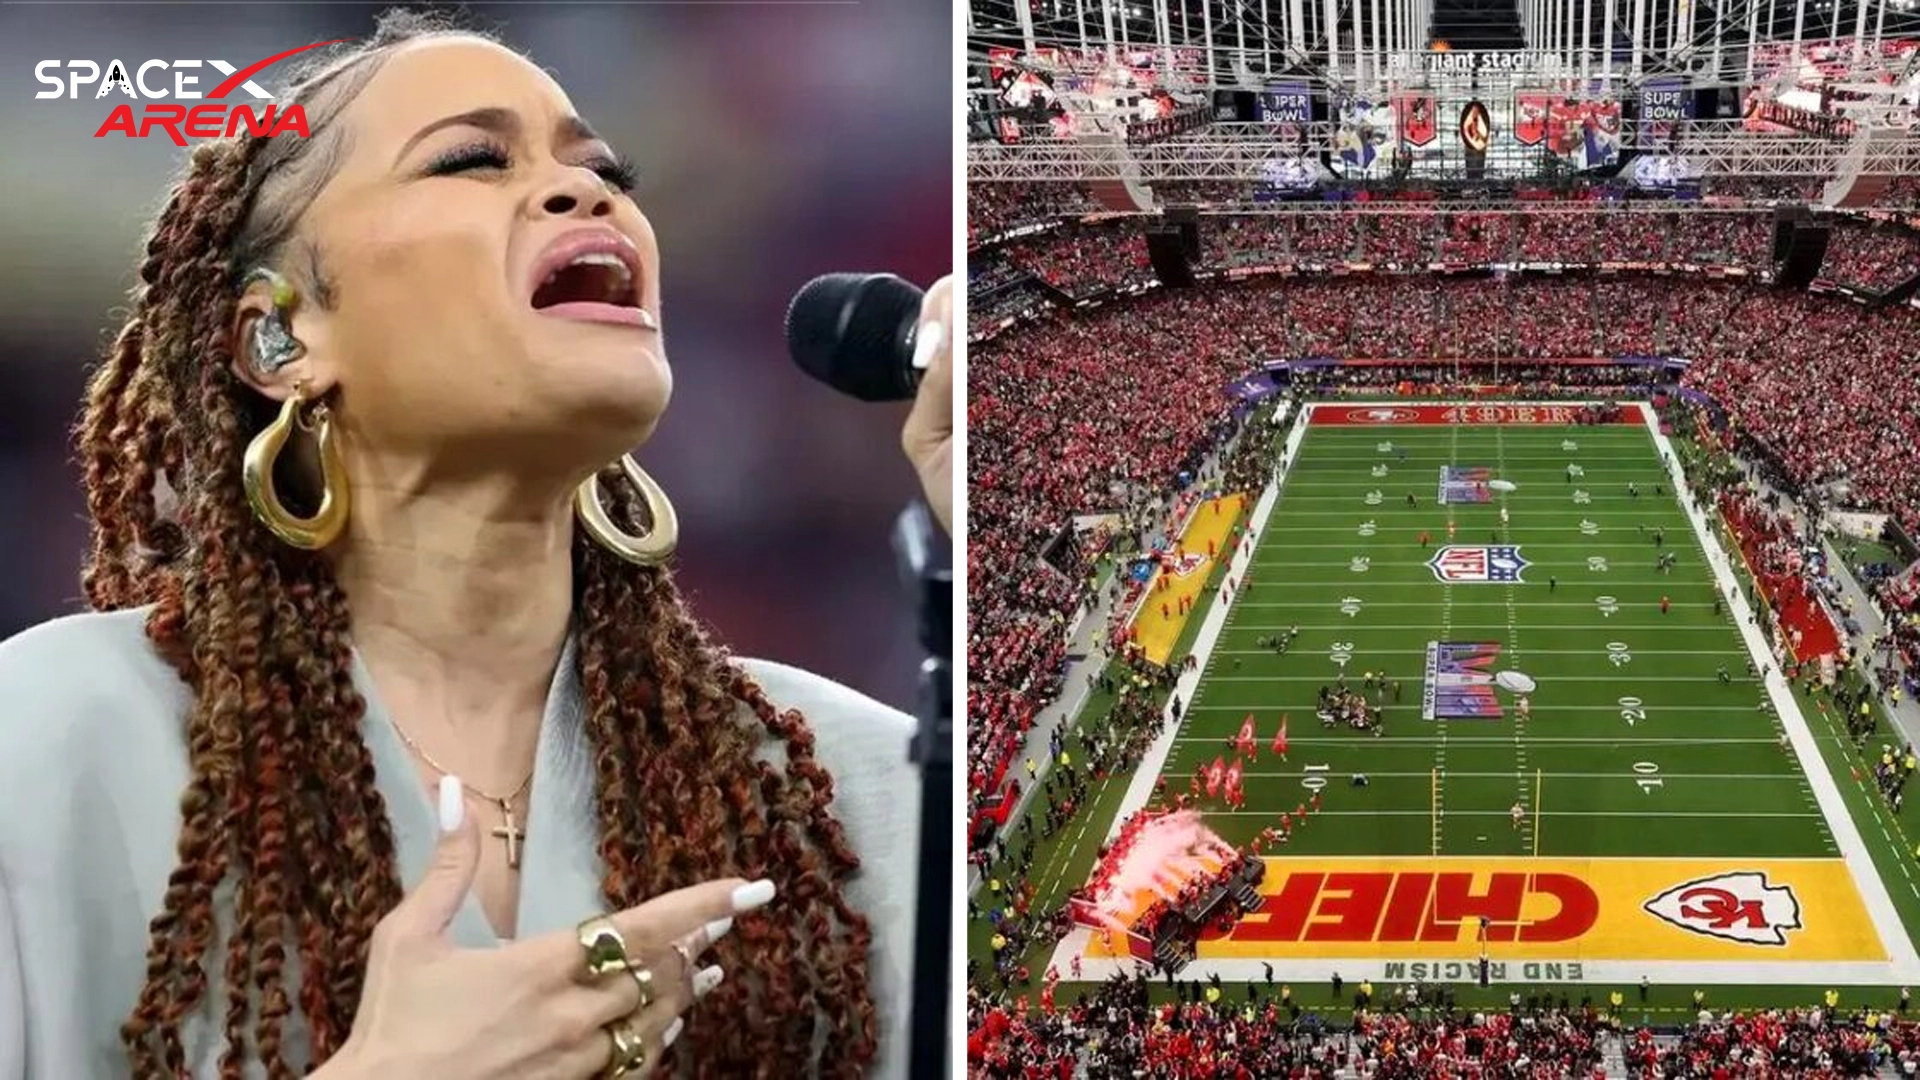 Andra Day is fined $1 billion by the NFL for singing the Black National Anthem during Super Bowl LVIII.